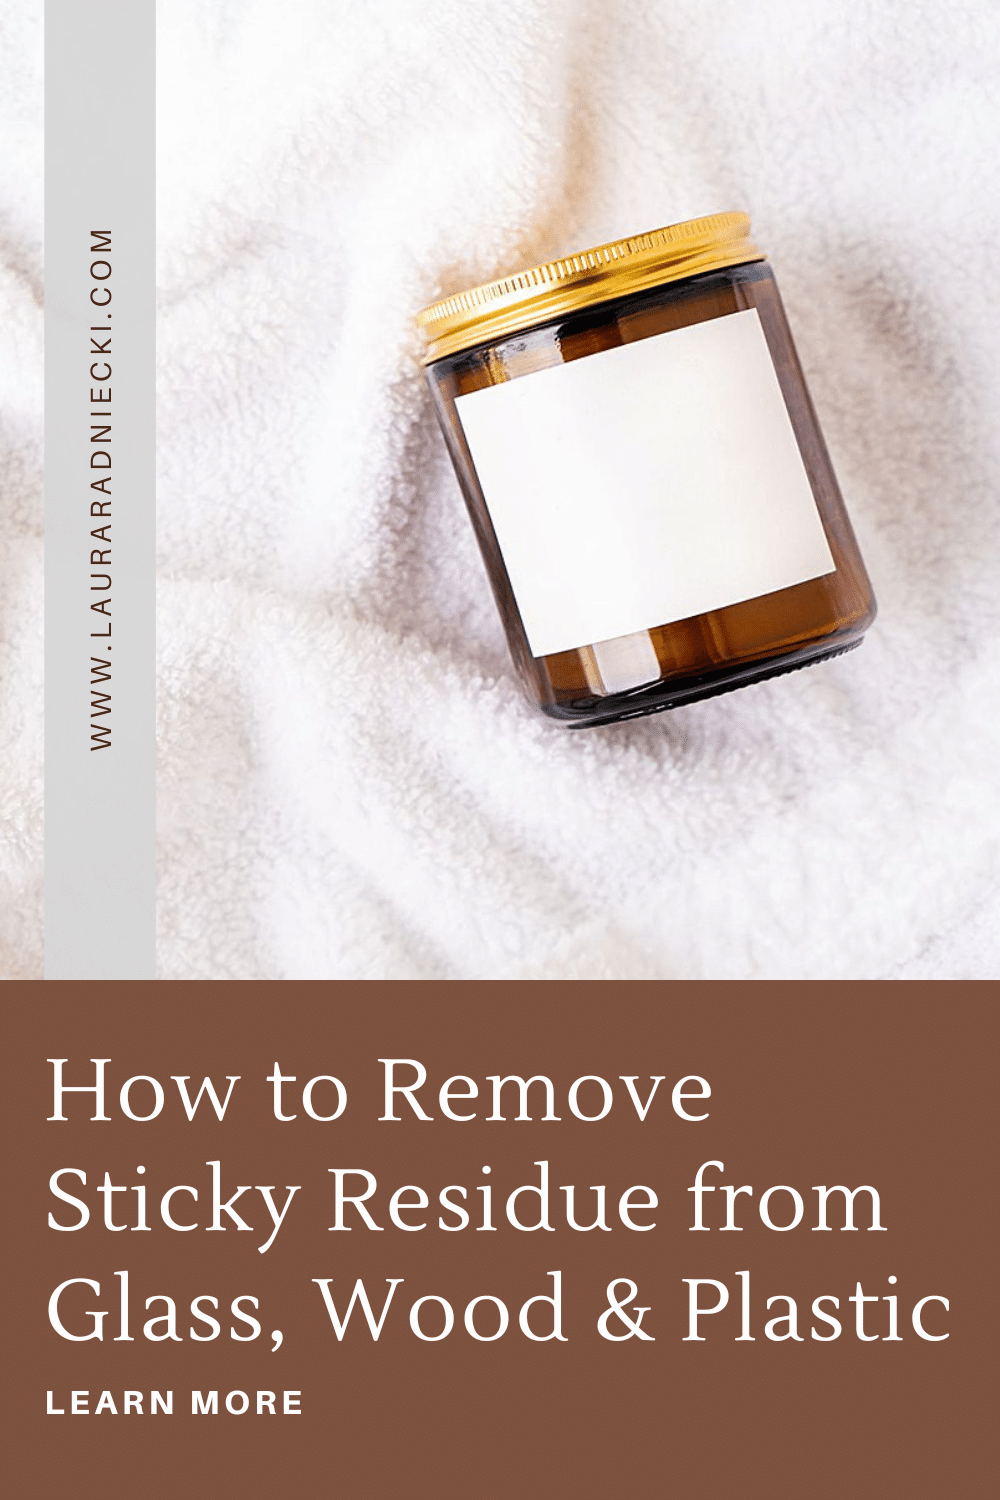 how to remove sticker residue easily from glass, wood, or plastic